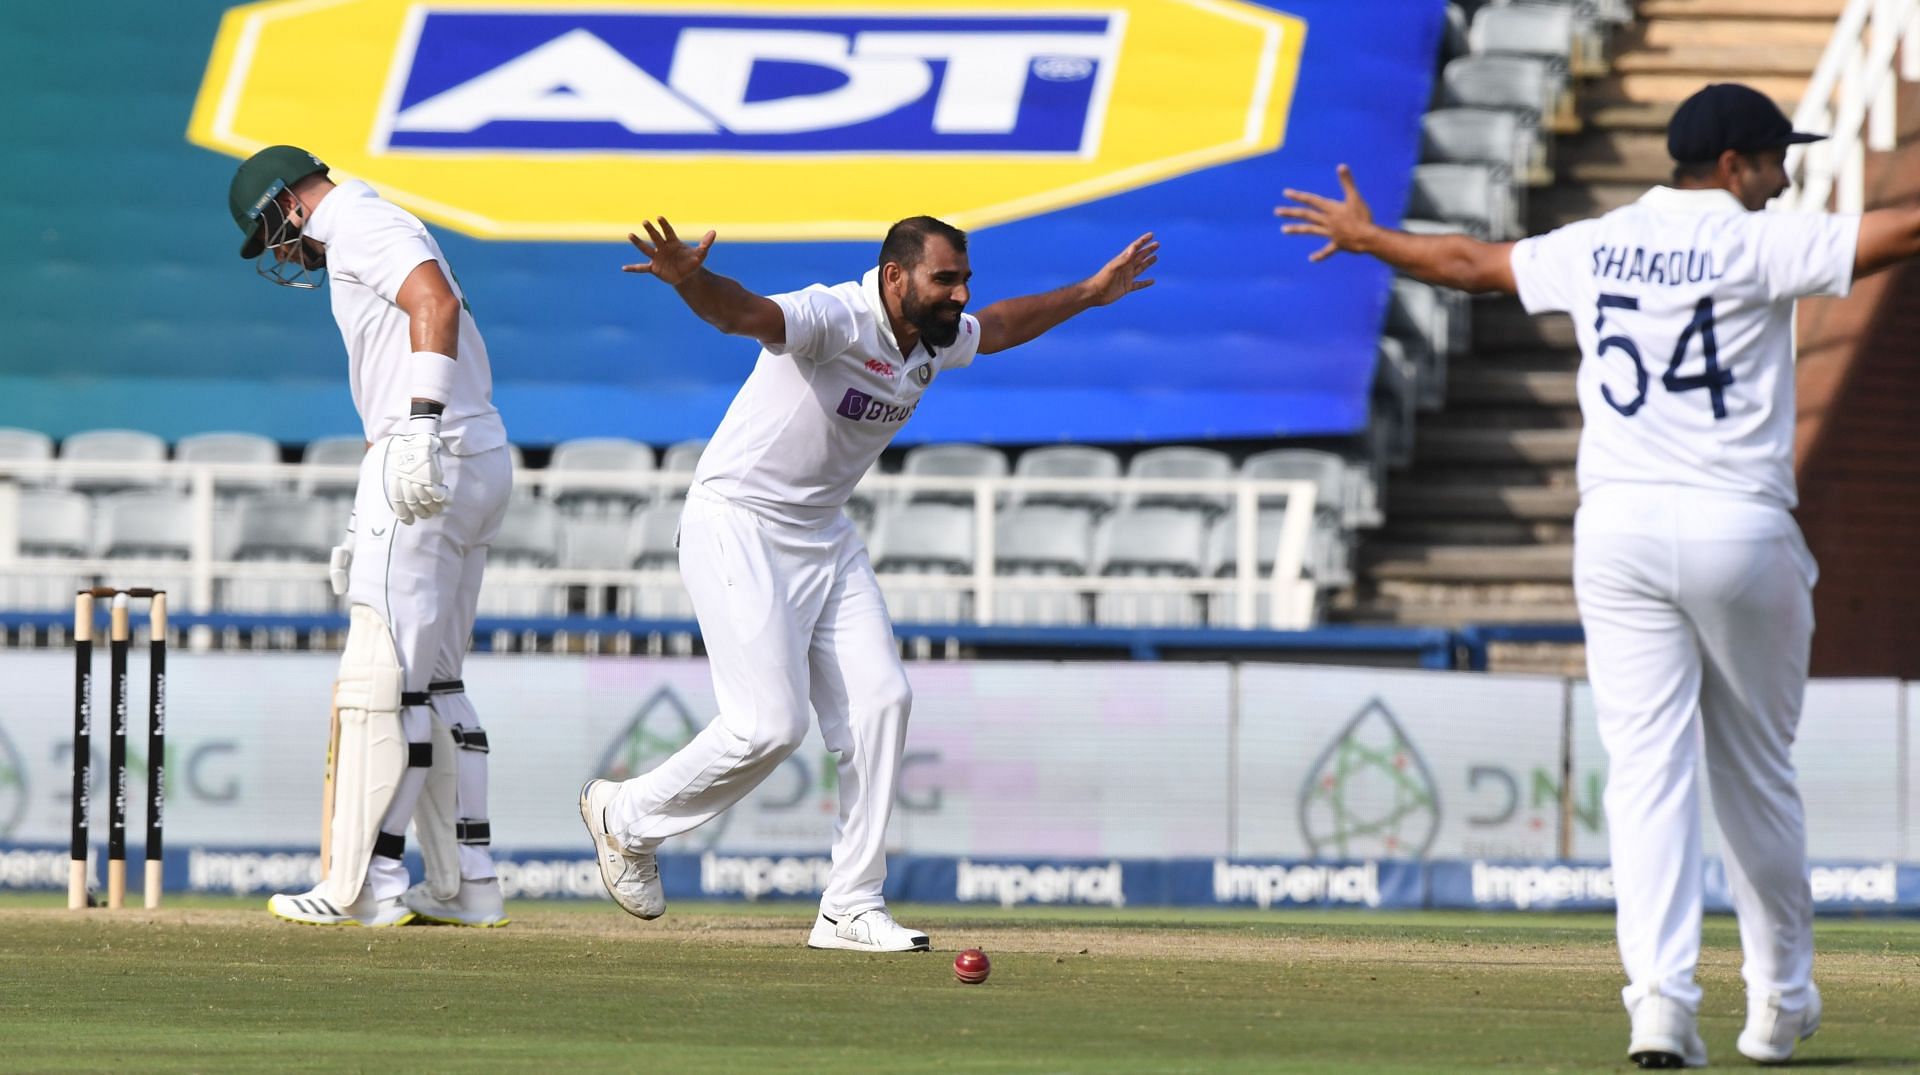 Mohammed Shami has had the upper hand over Aiden Markram this series.